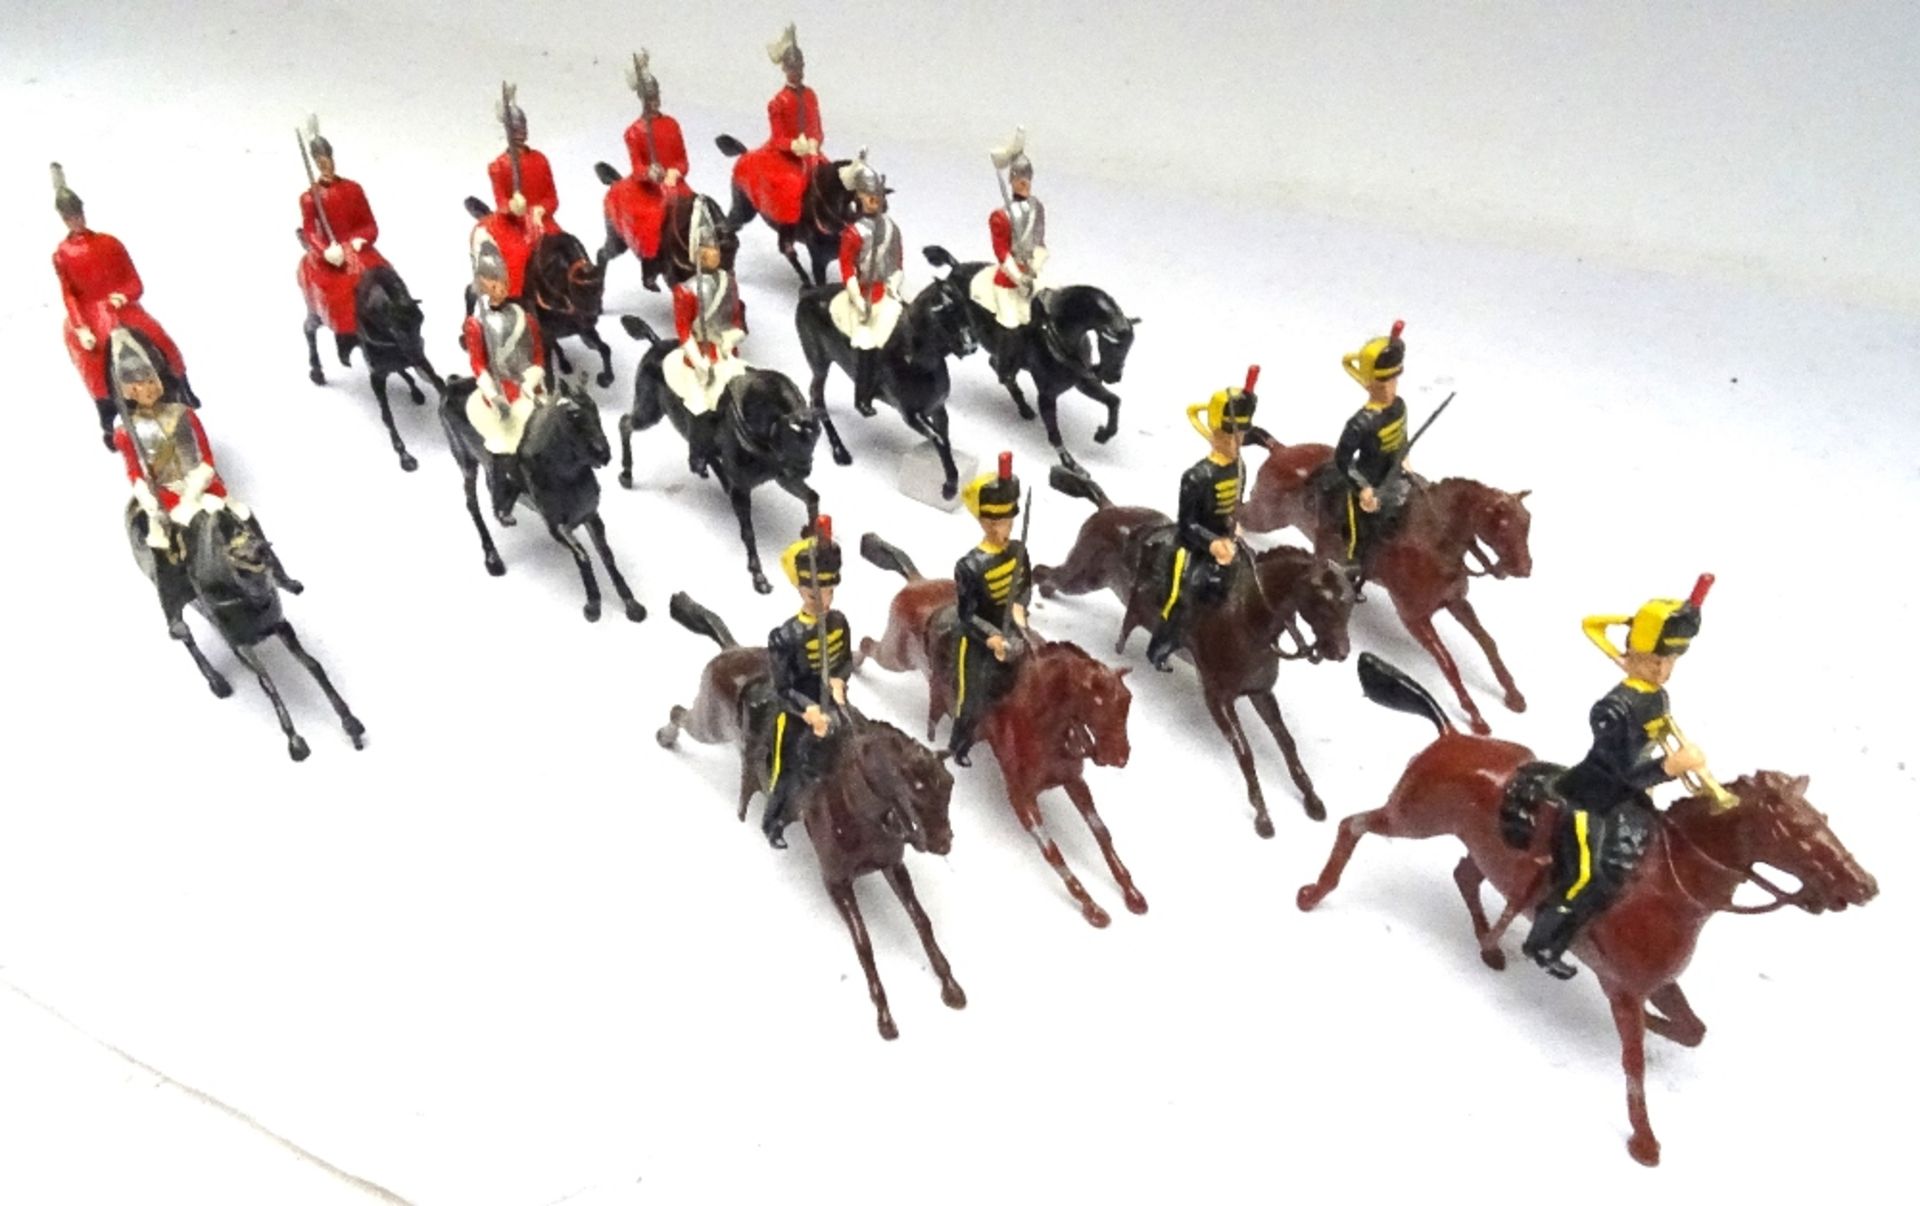 Britains set 1, Life Guards - Image 2 of 3